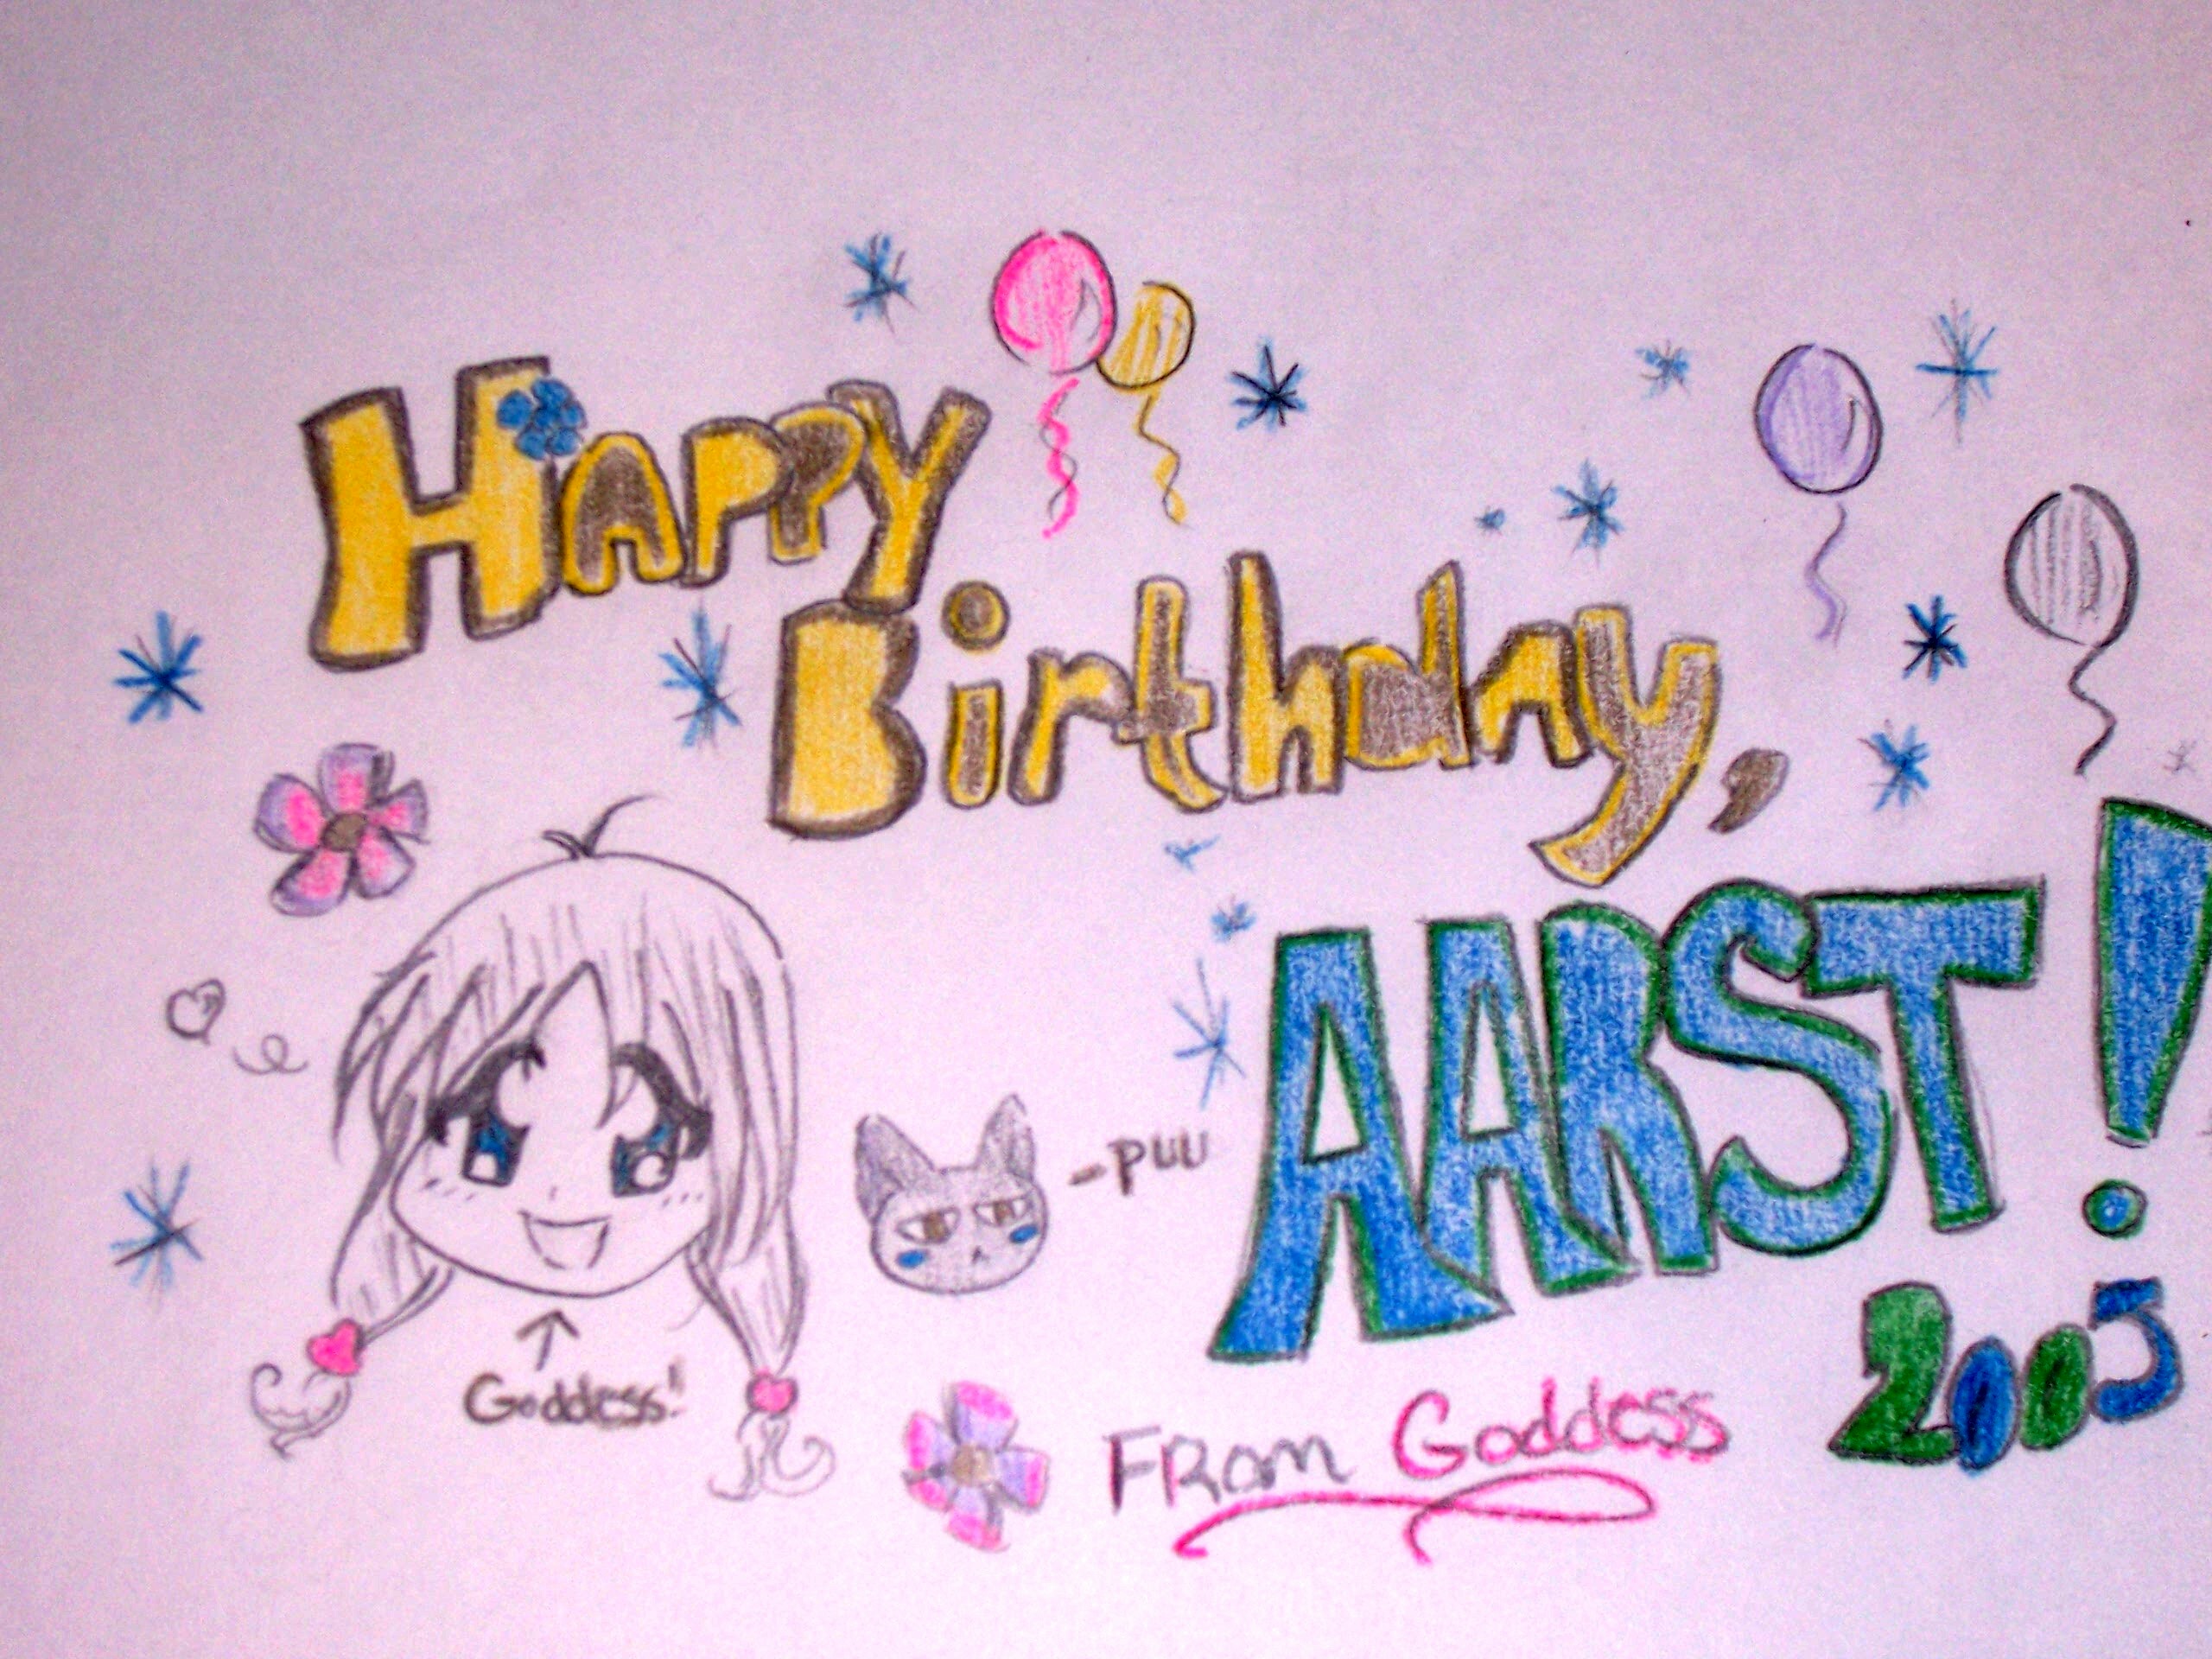 Happy Birthday AARST! by sugarbabylove